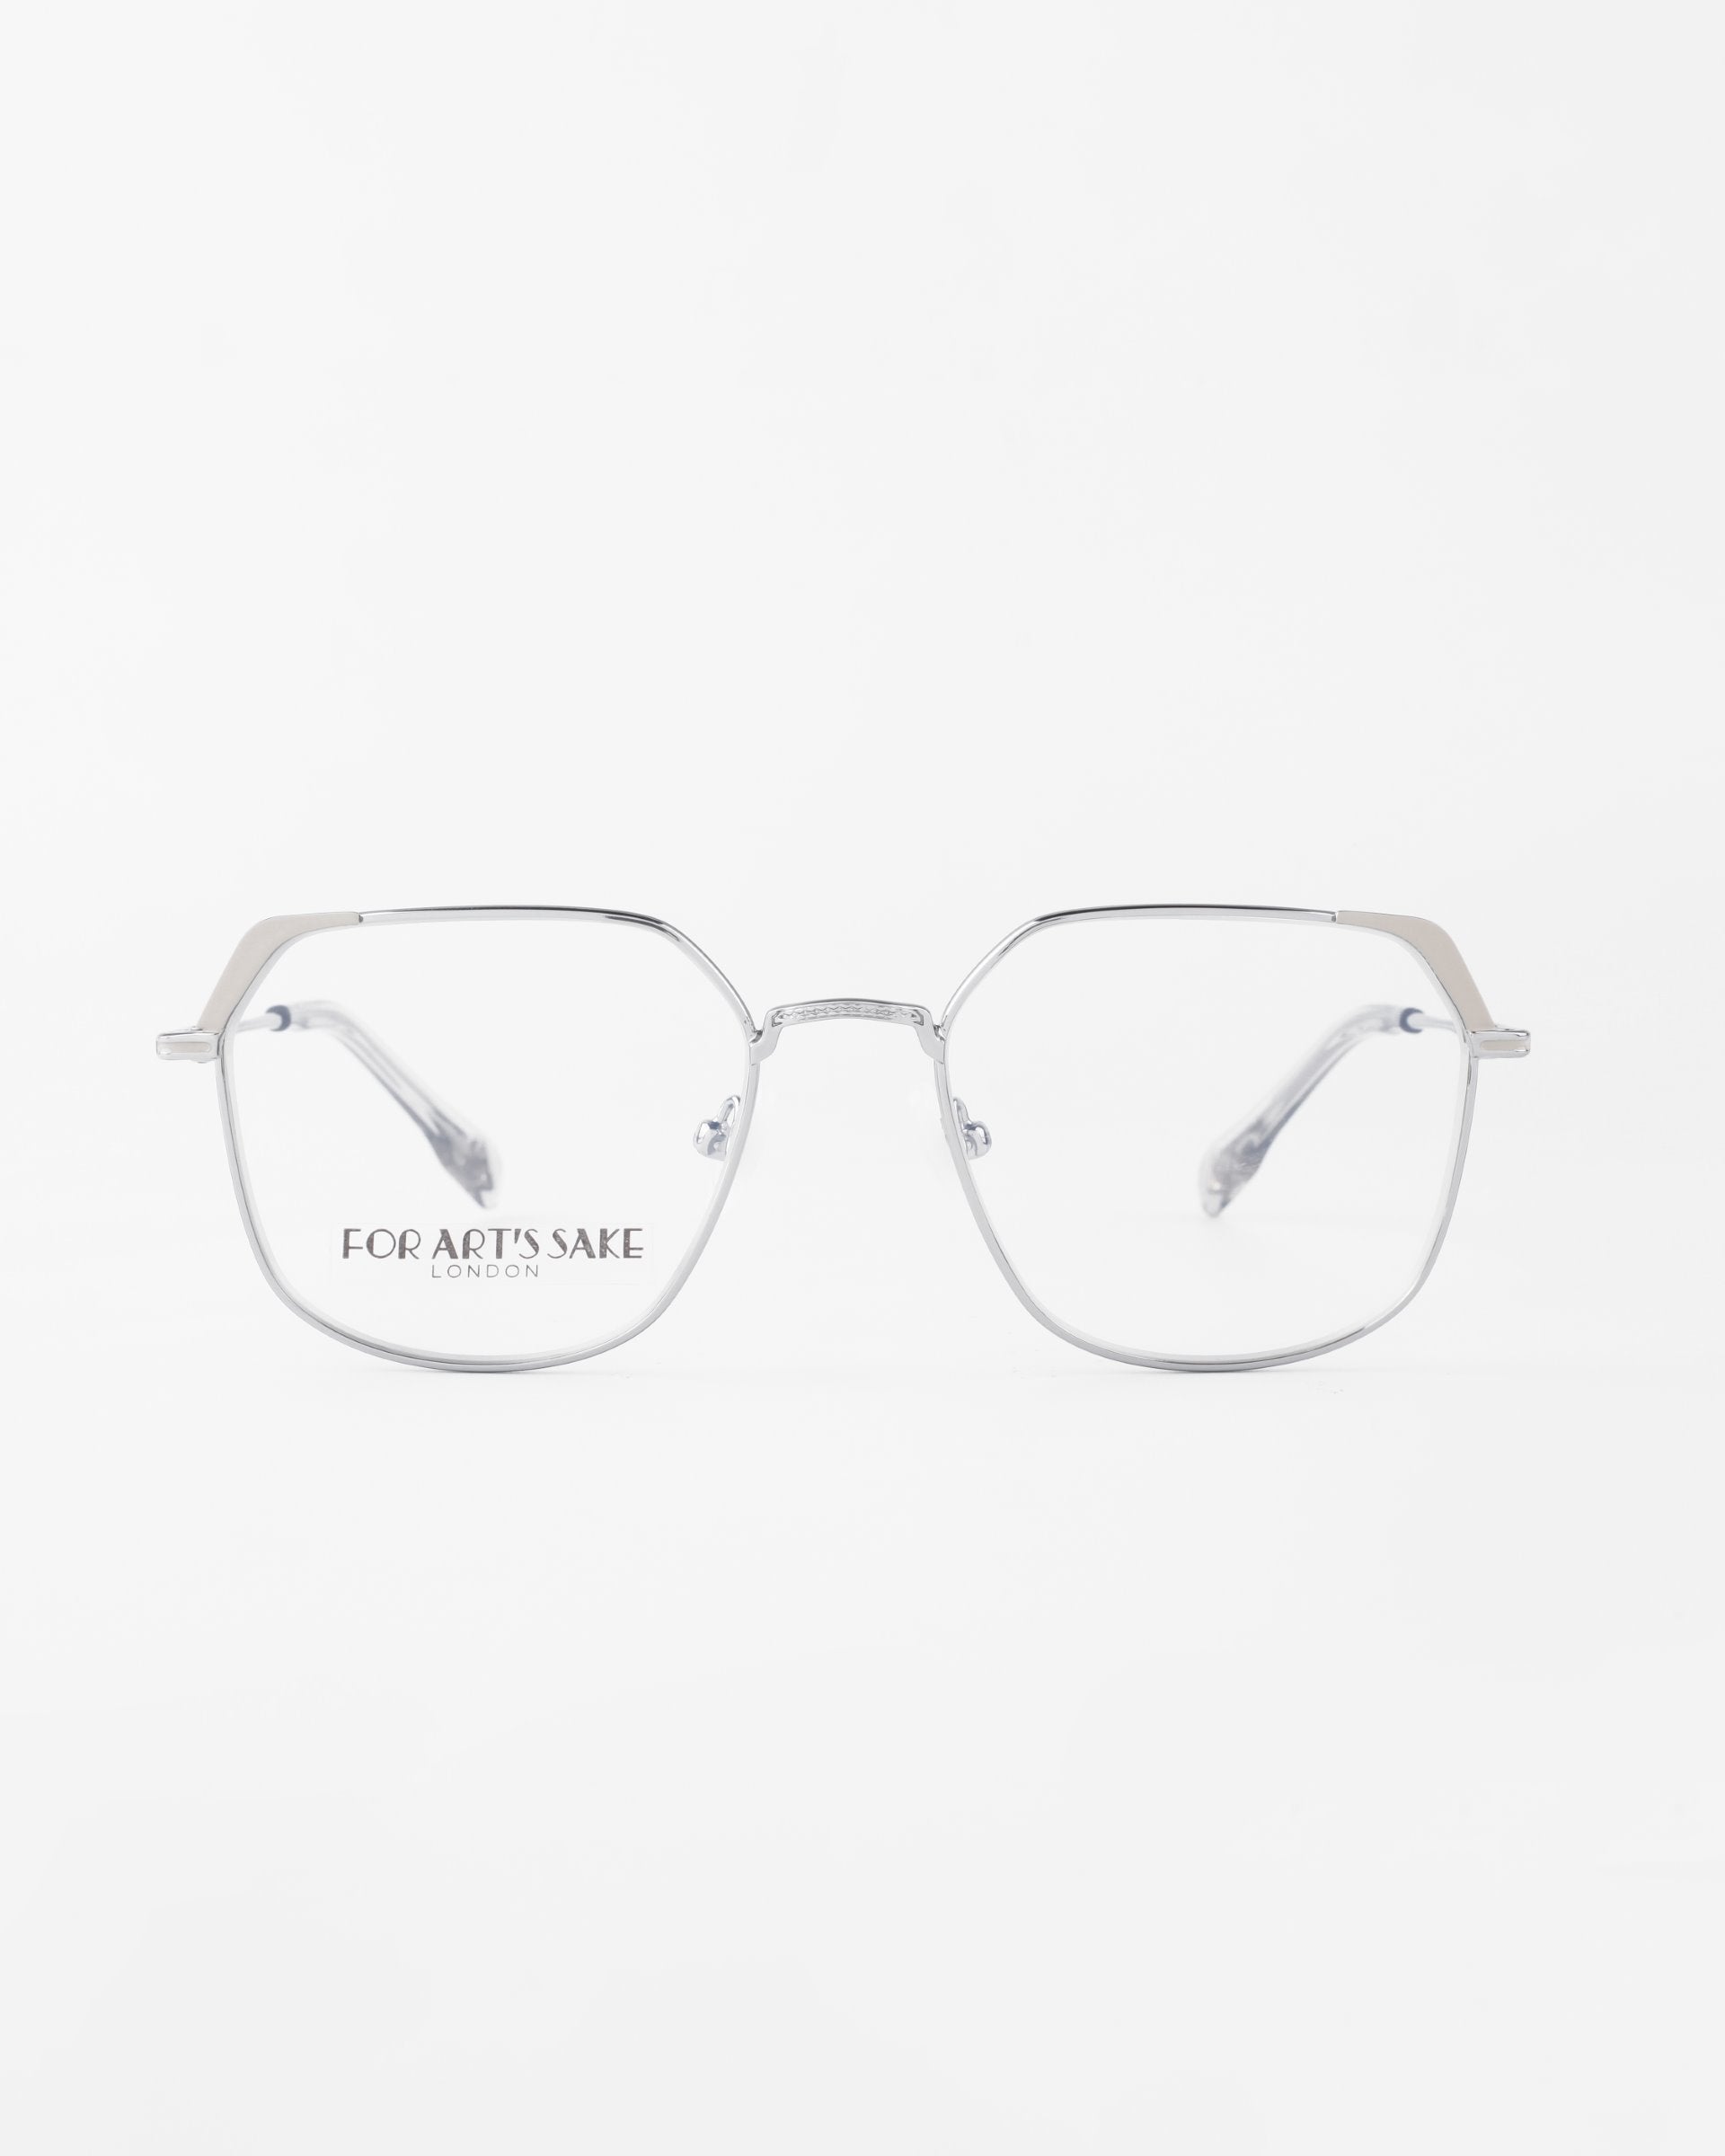 A pair of Godiva eyeglasses from For Art&#39;s Sake®, with a geometric design, featuring thin, angular metal temples and clear lenses with blue light filter. The phrase &quot;FOR ART&#39;S SAKE LONDON&quot; is printed on the left lens. The glasses are displayed against a white background.